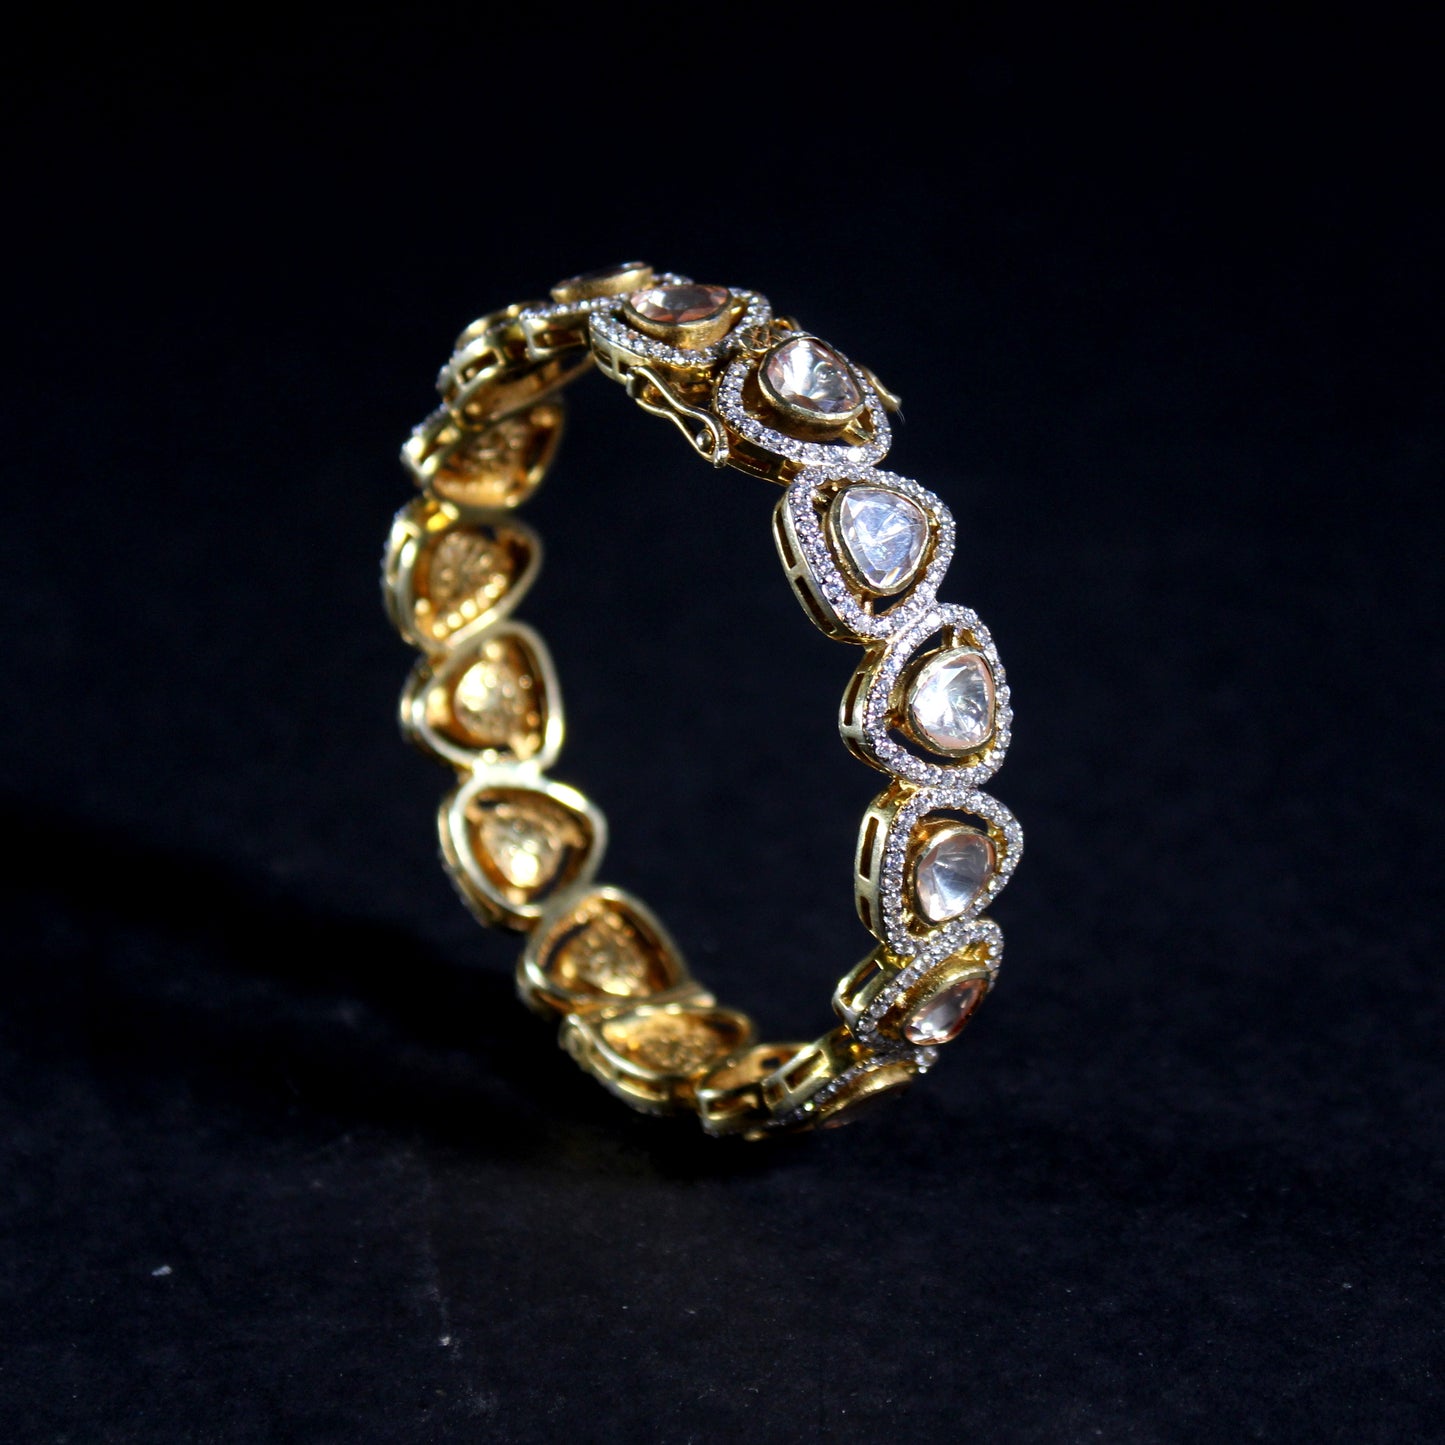 GOLD PLATED STERLING SILVER BANGLE  IN  MOSONITE POLKI COLLECTIONS.